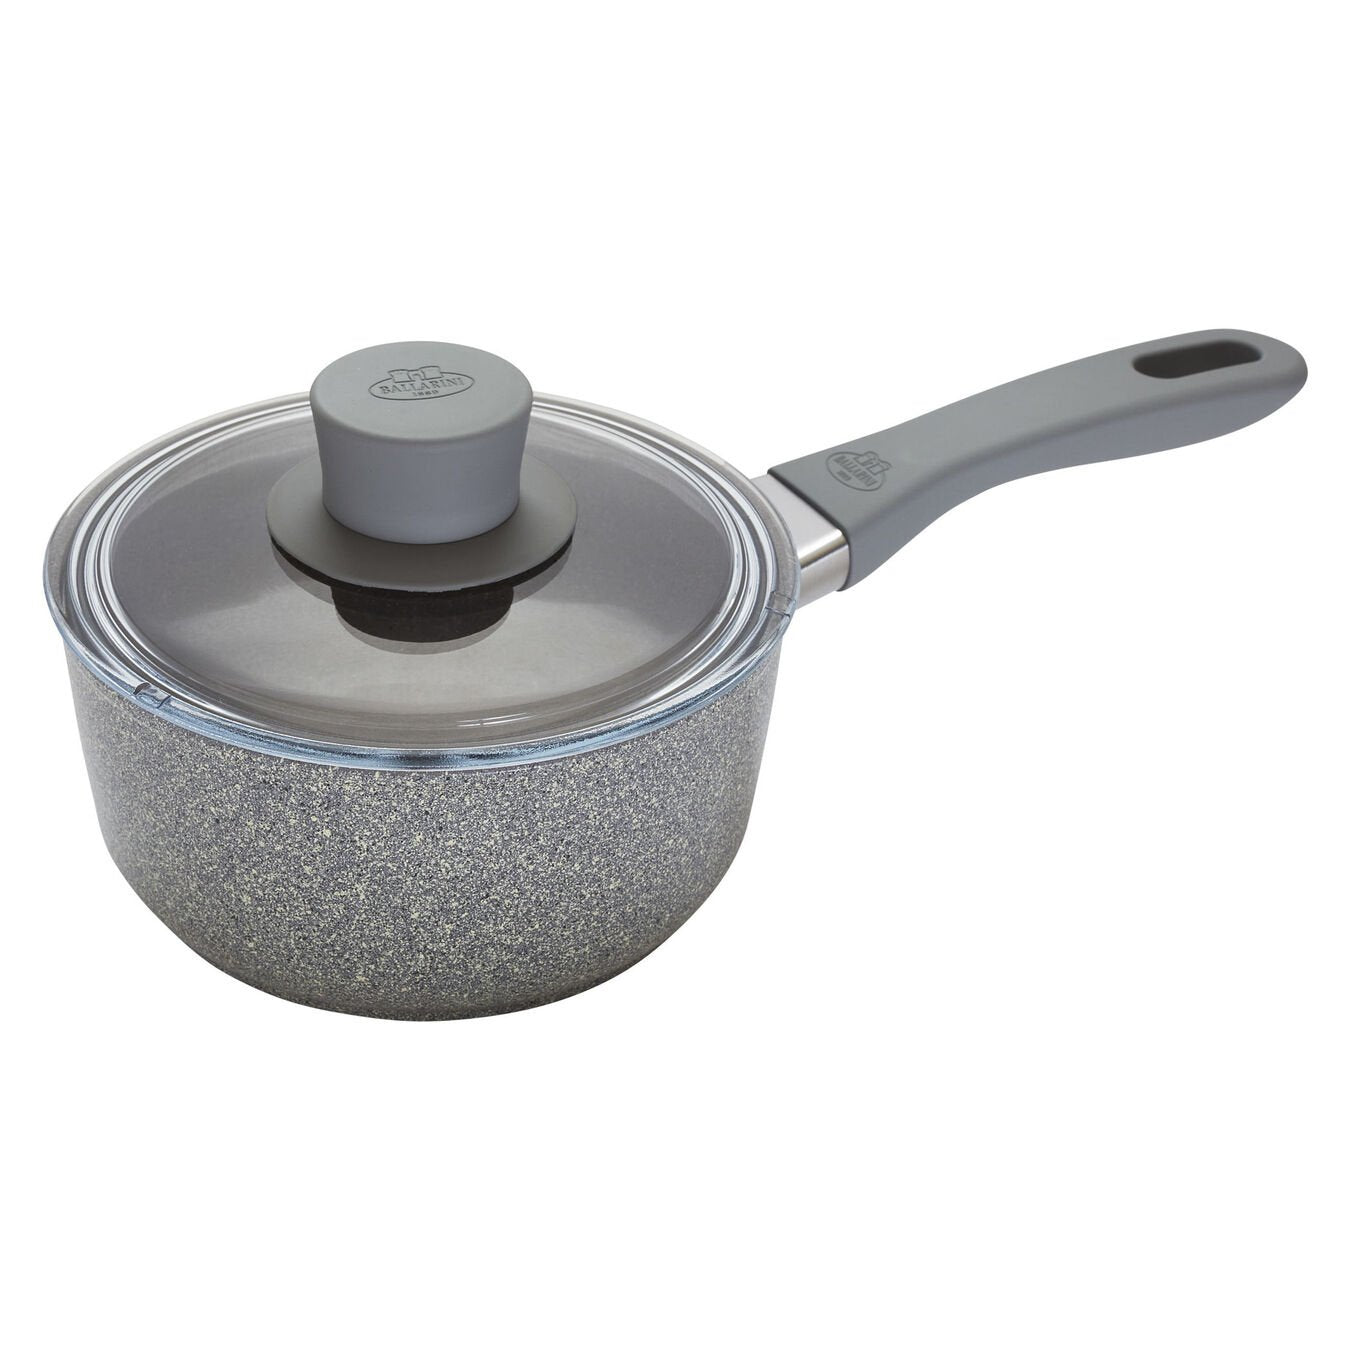 sauce pan with lid on white background